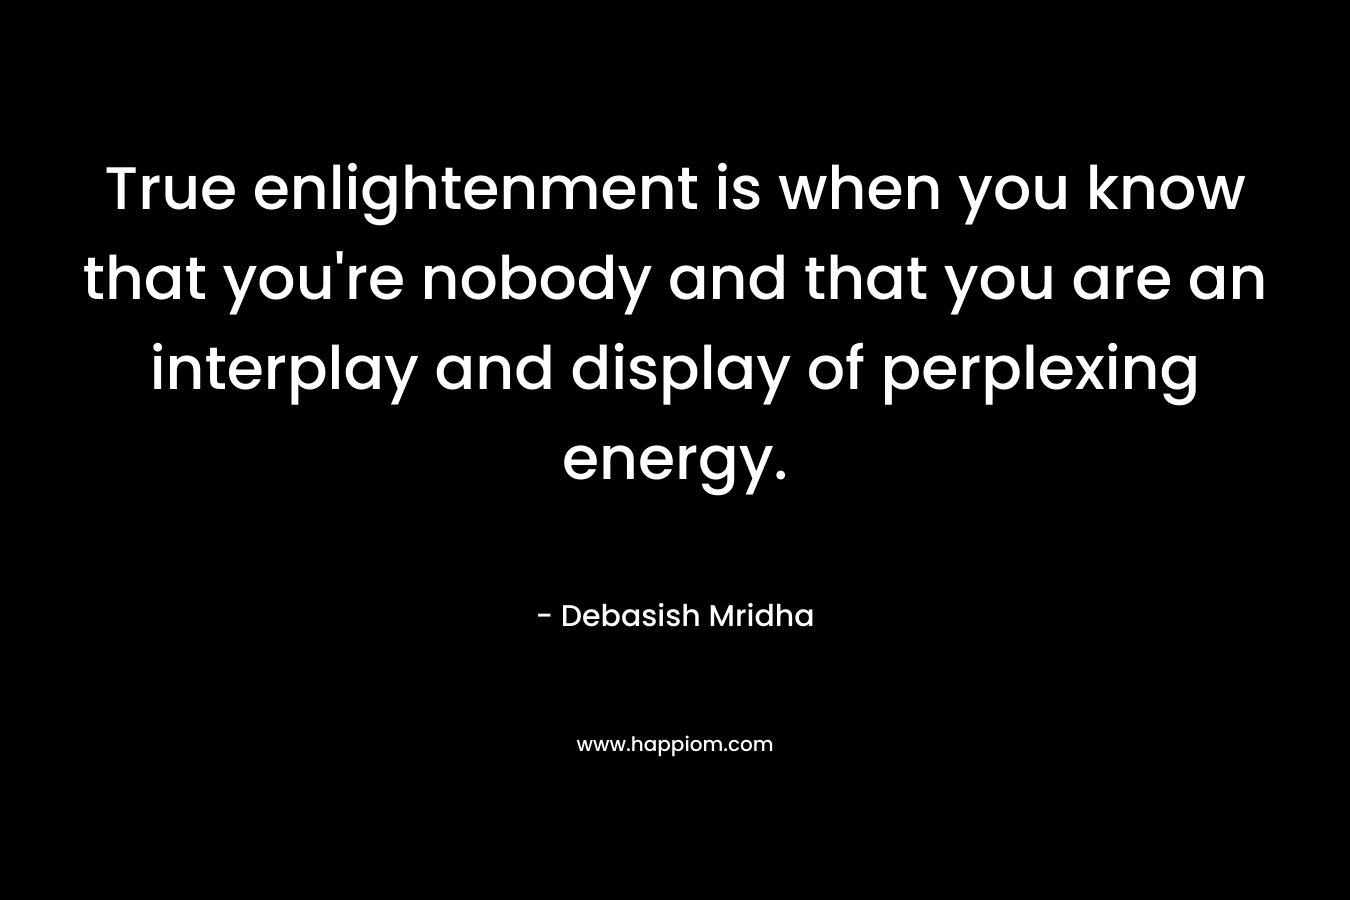 True enlightenment is when you know that you're nobody and that you are an interplay and display of perplexing energy.